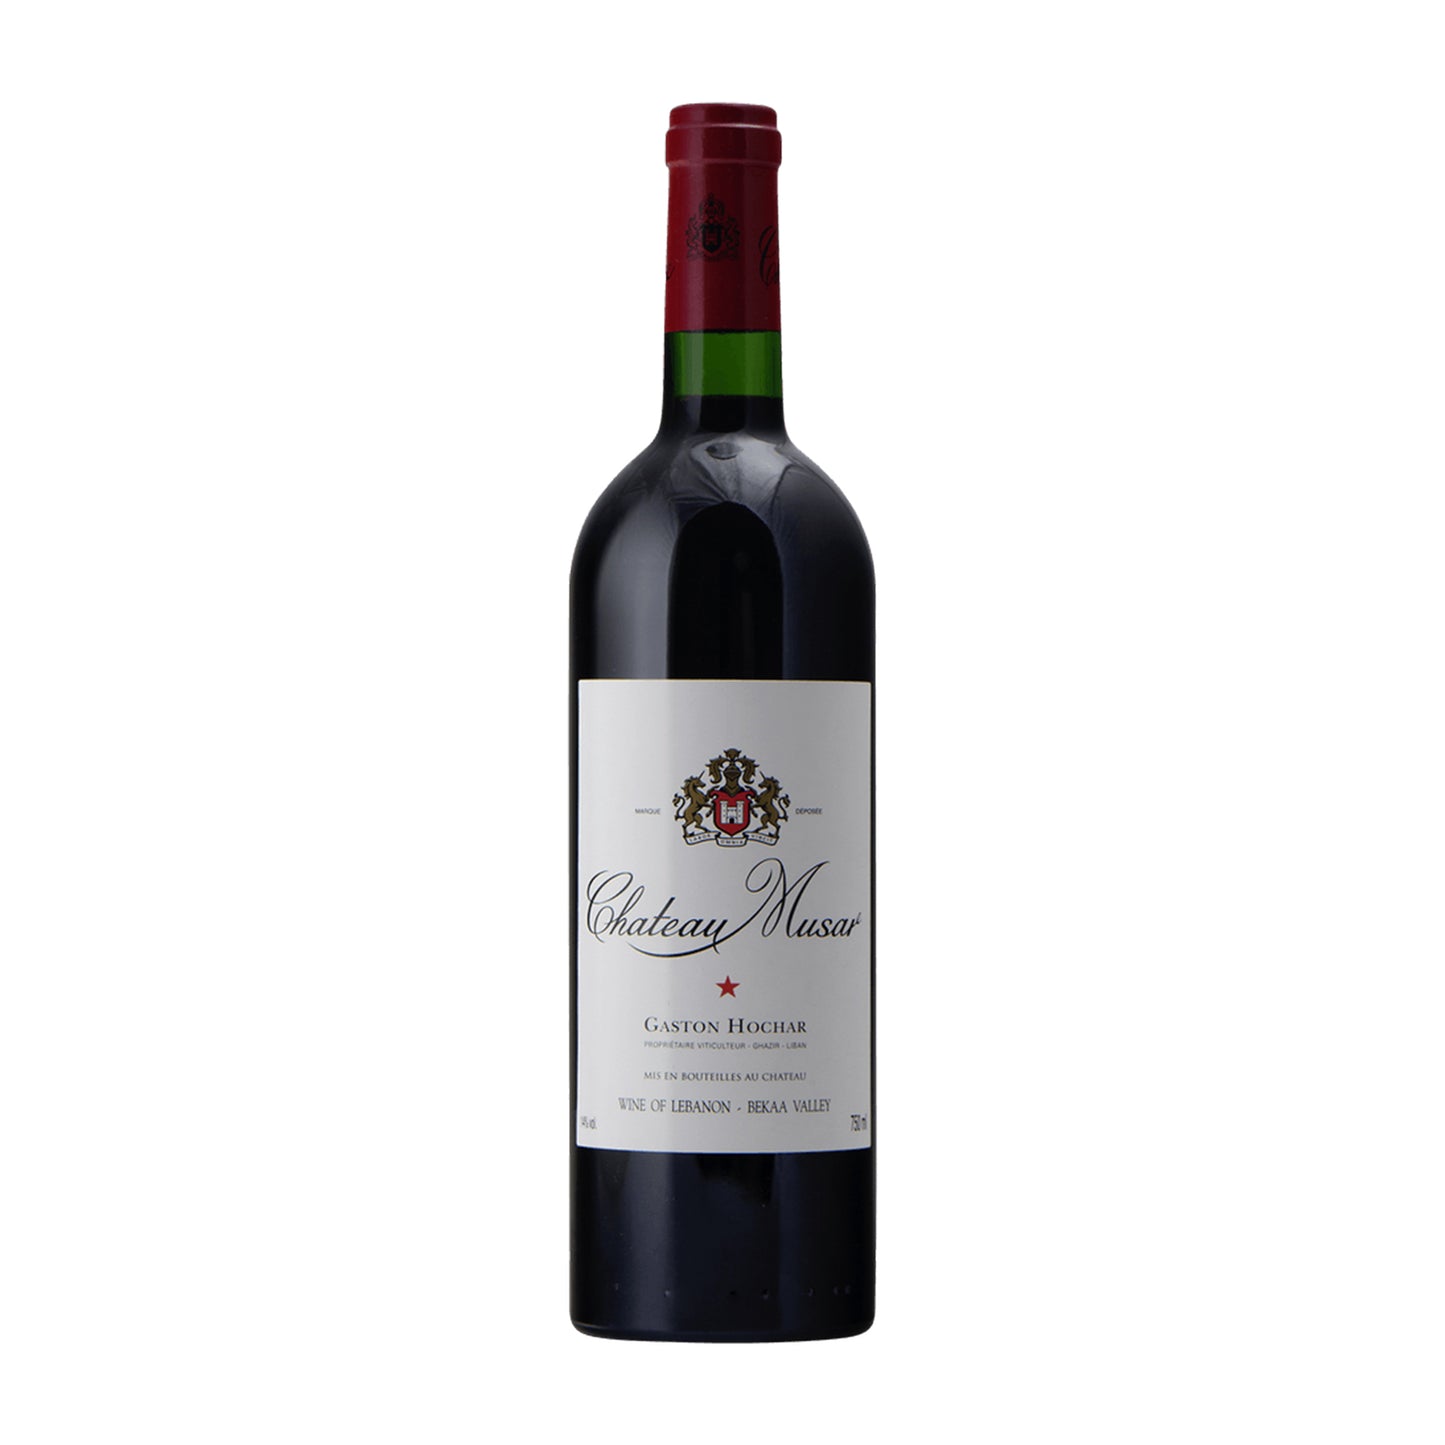 Chateau Musar, 2004